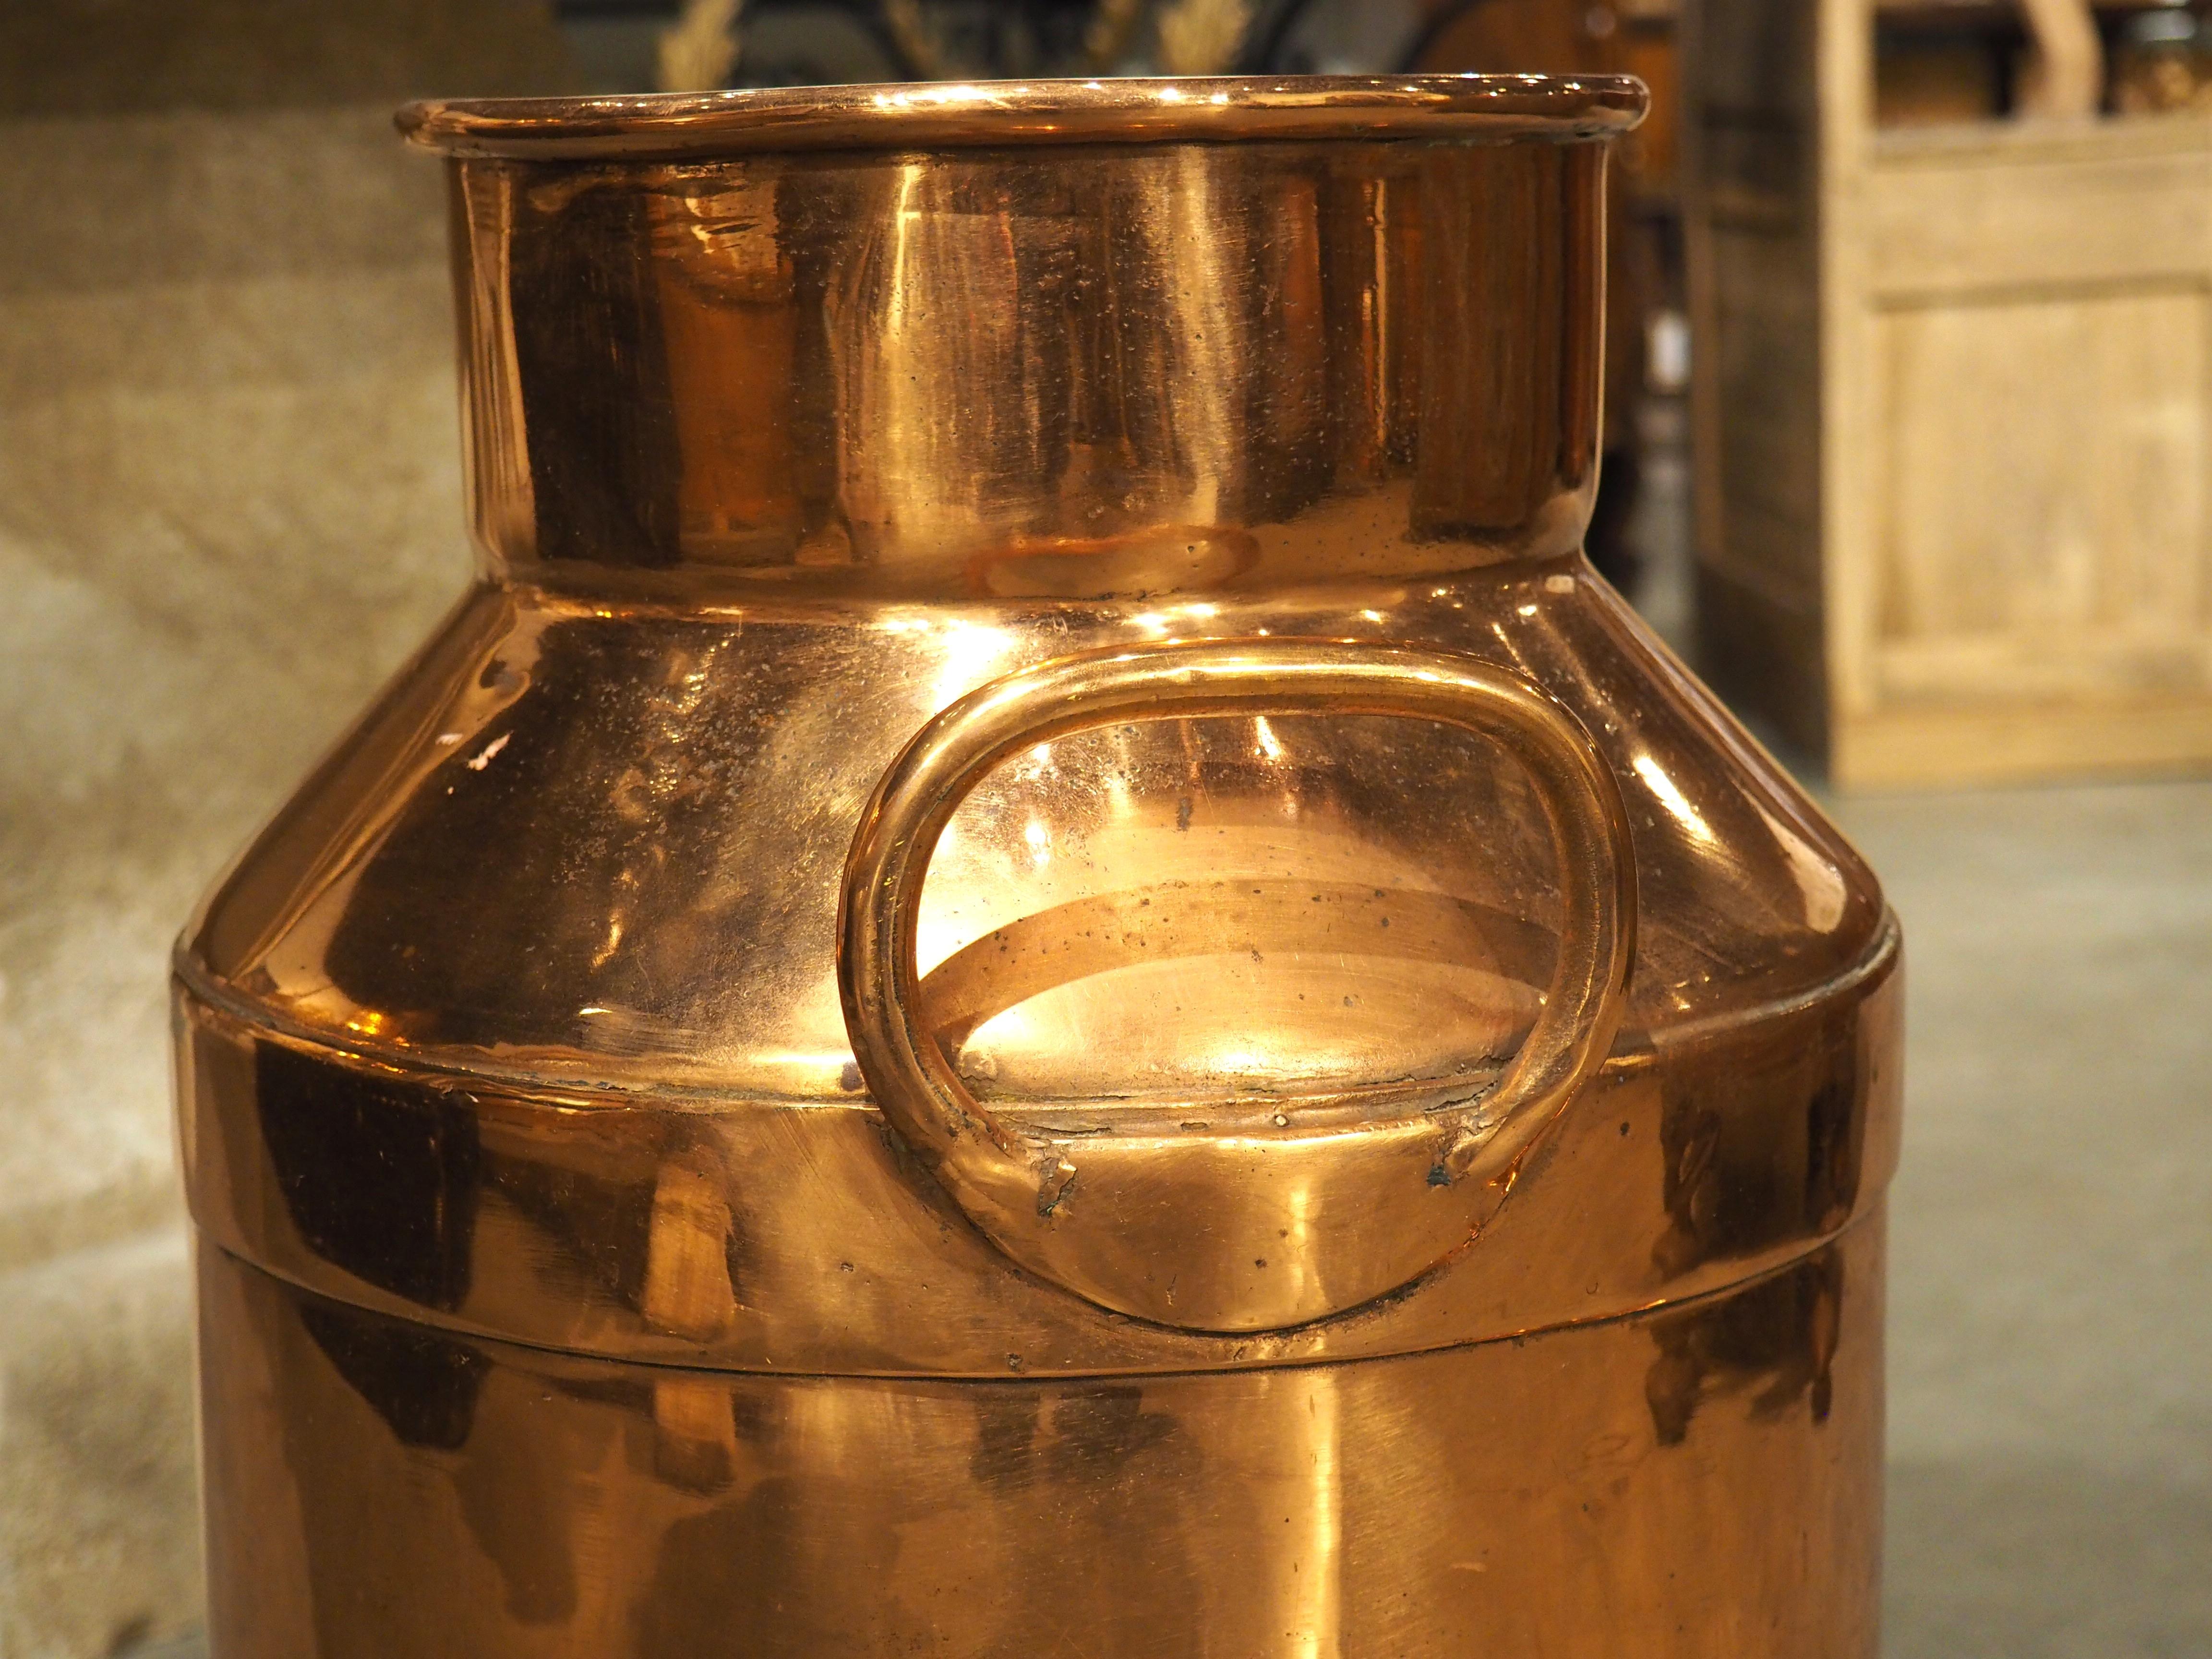 Measuring over 2 feet tall, this beautifully polished copper vessel is particularly large and dates to the early 1900s.  Before the advent of refrigerated trucks, metal milk containers, such as this would be used by dairy farmers to transport milk